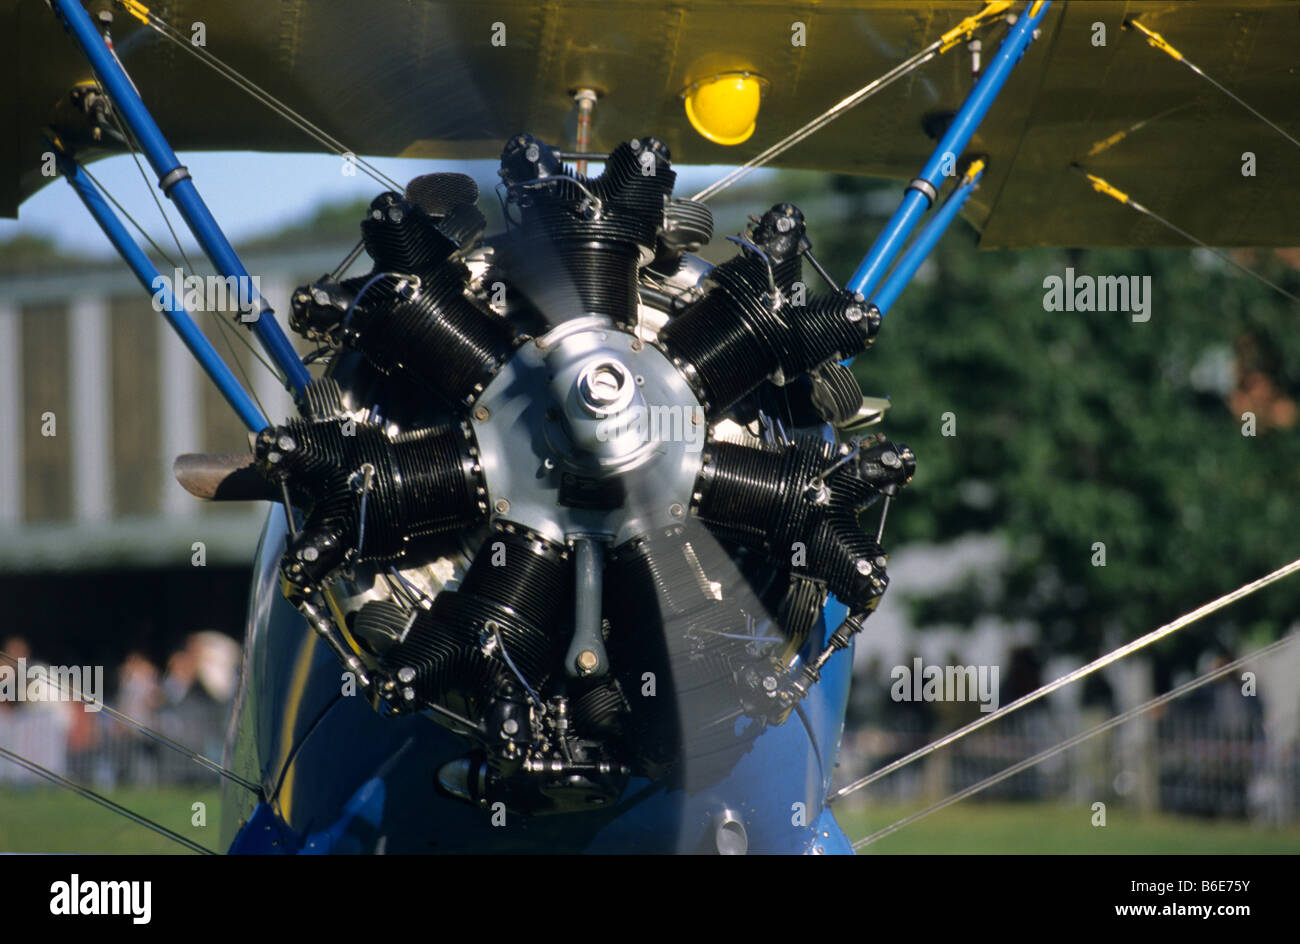 Old american Continental R-670-5 radial engine (225 hp) on a trainer biplane Boeing PT-17 Kaydet / Stearman model 75 Stock Photo